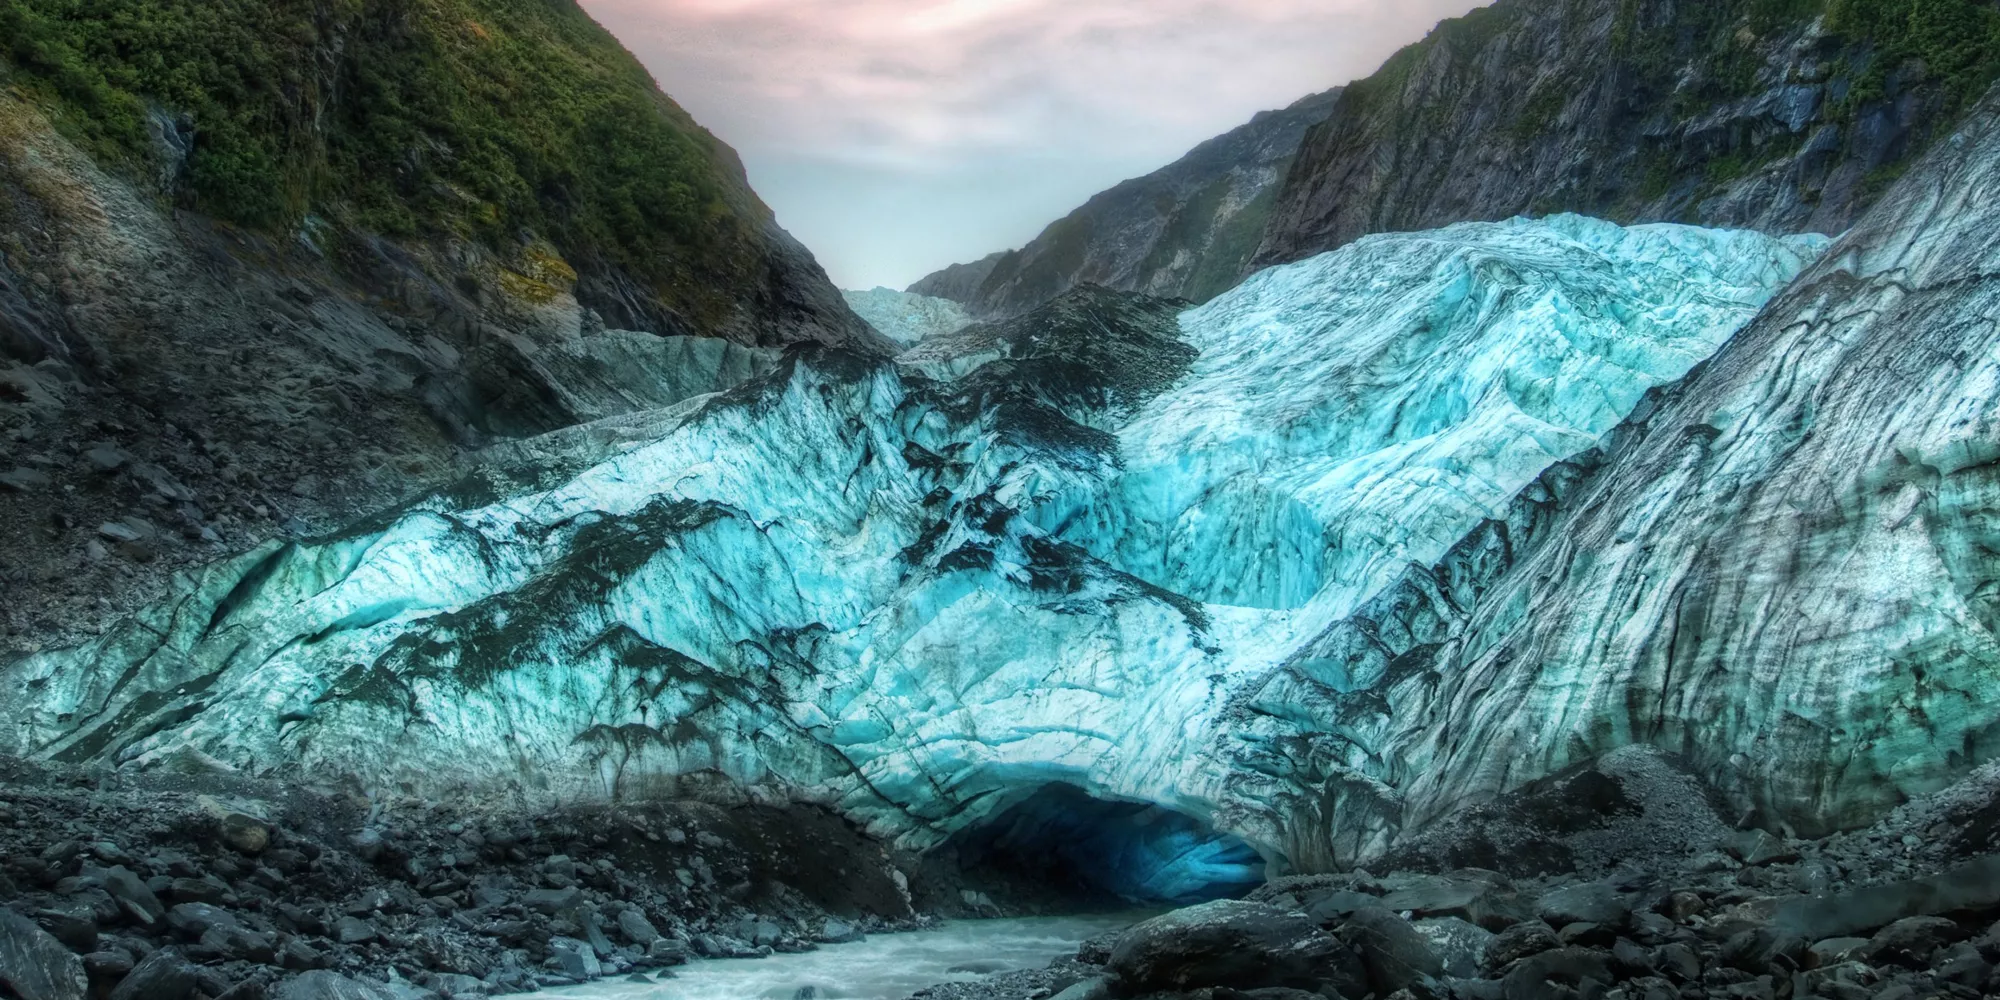 Fox and Franz Josef Glaciers in New Zealand, Australia and Oceania | Glaciers,Ice Climbing - Rated 0.9